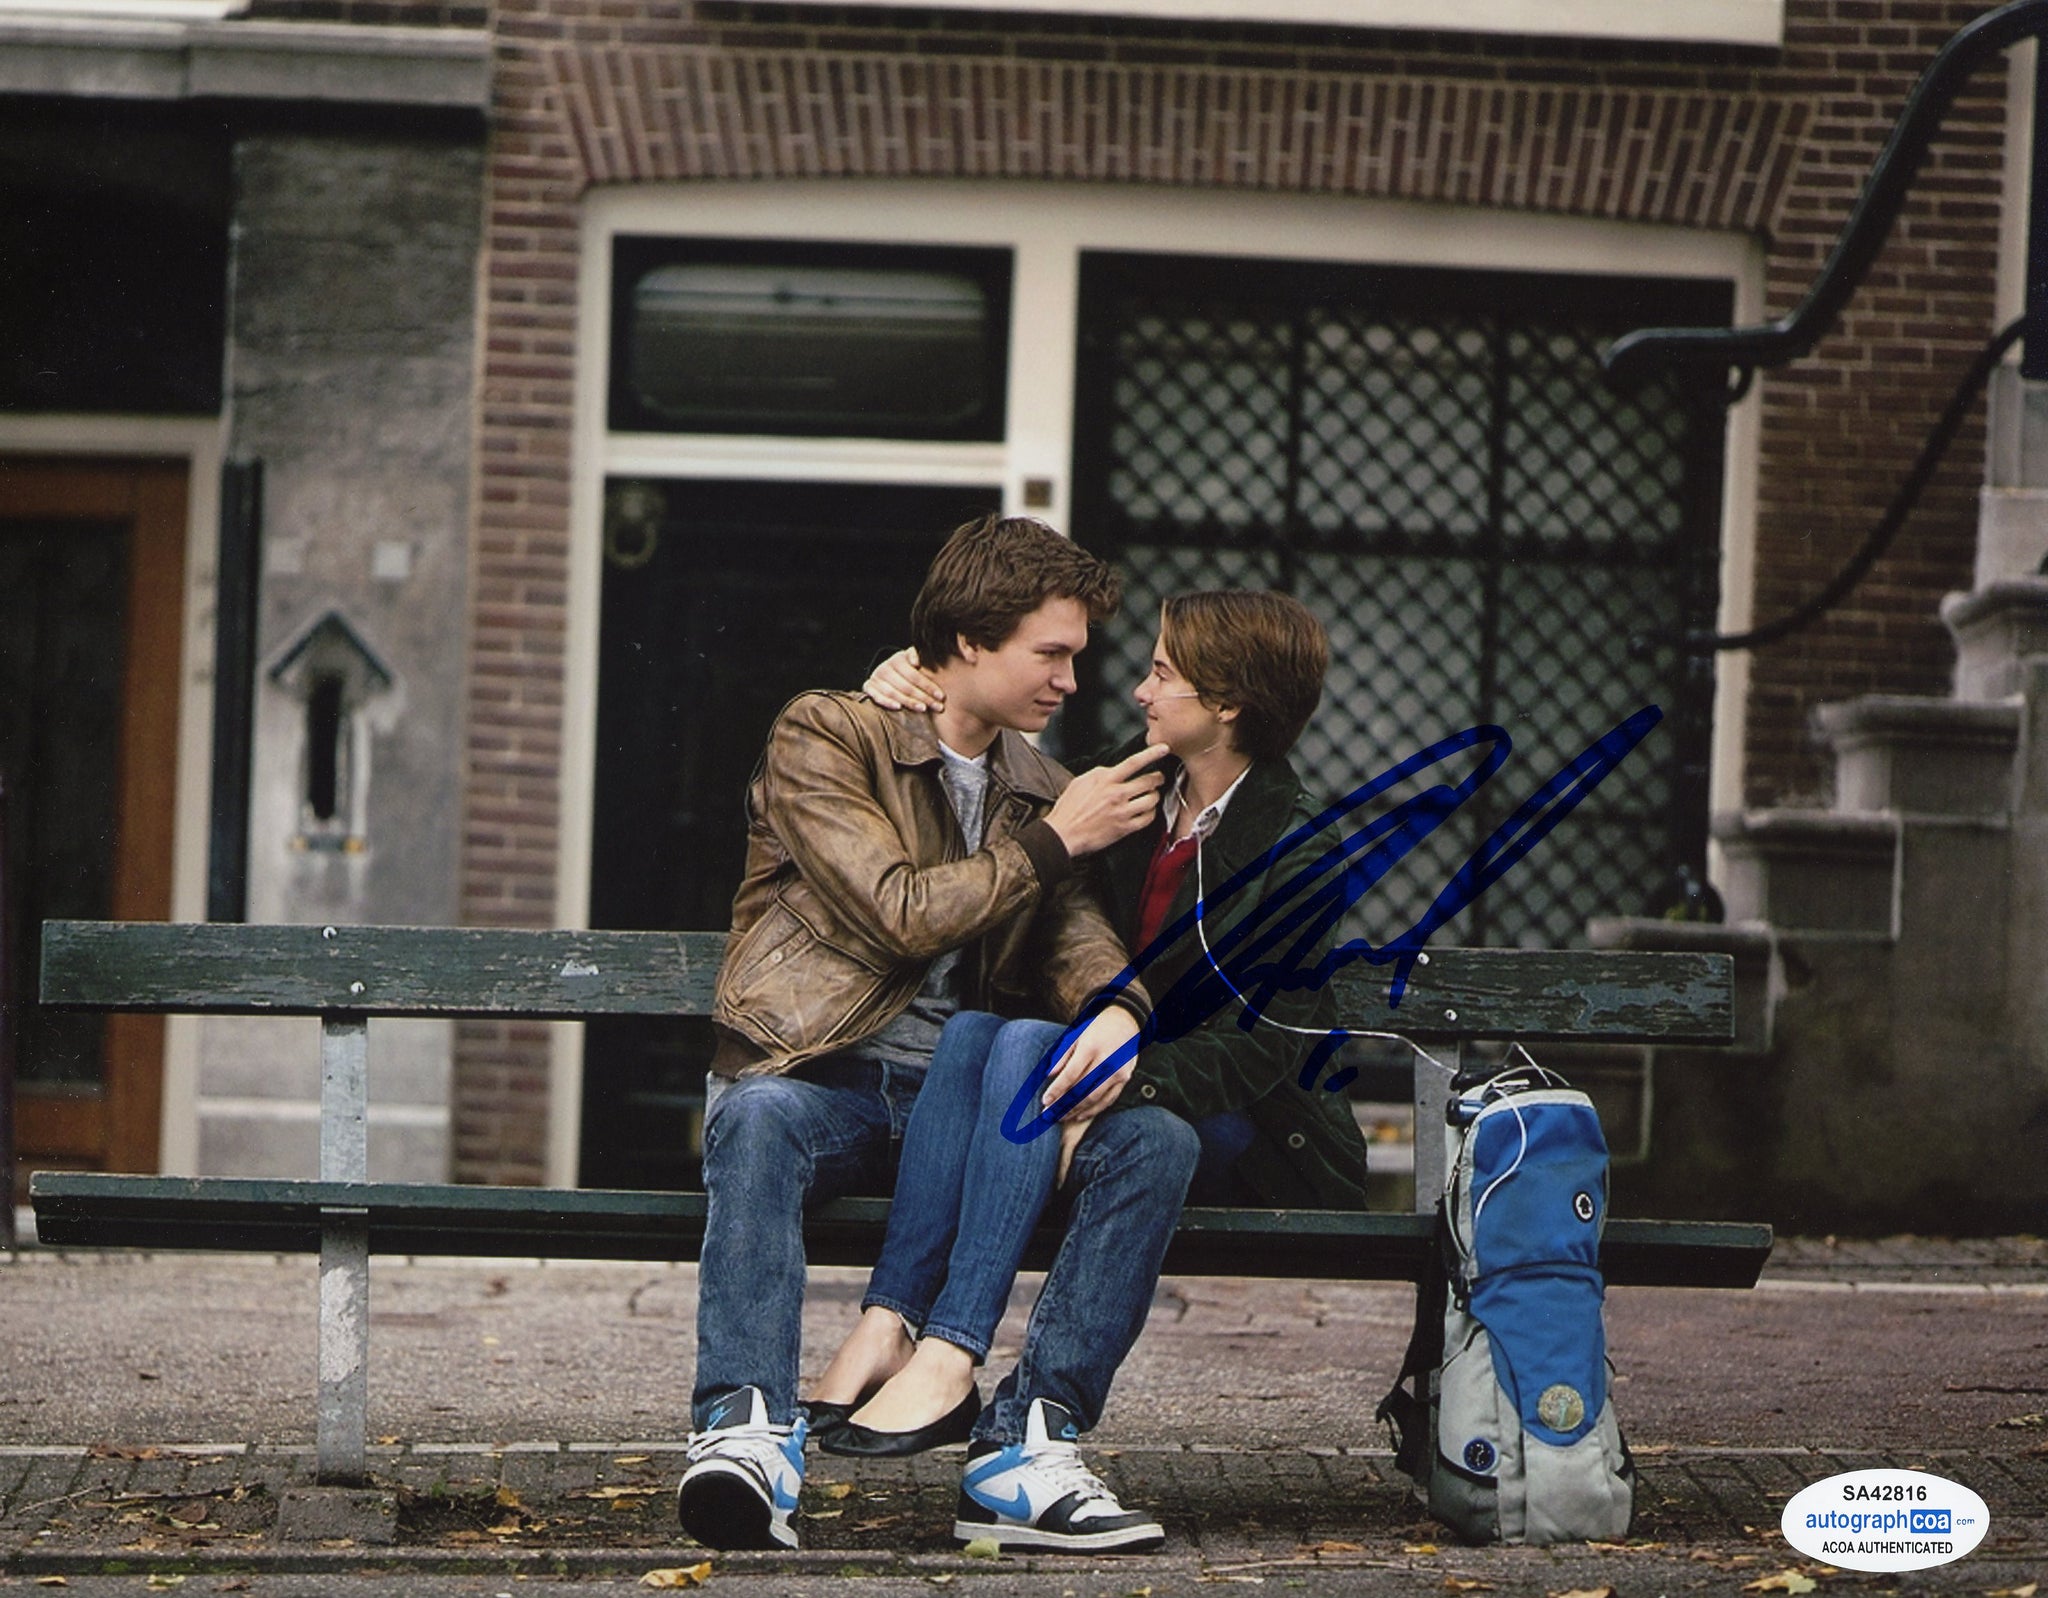 Ansel Elgort Fault in Our Stars Signed Autograph 8x10 Photo ACOA #8